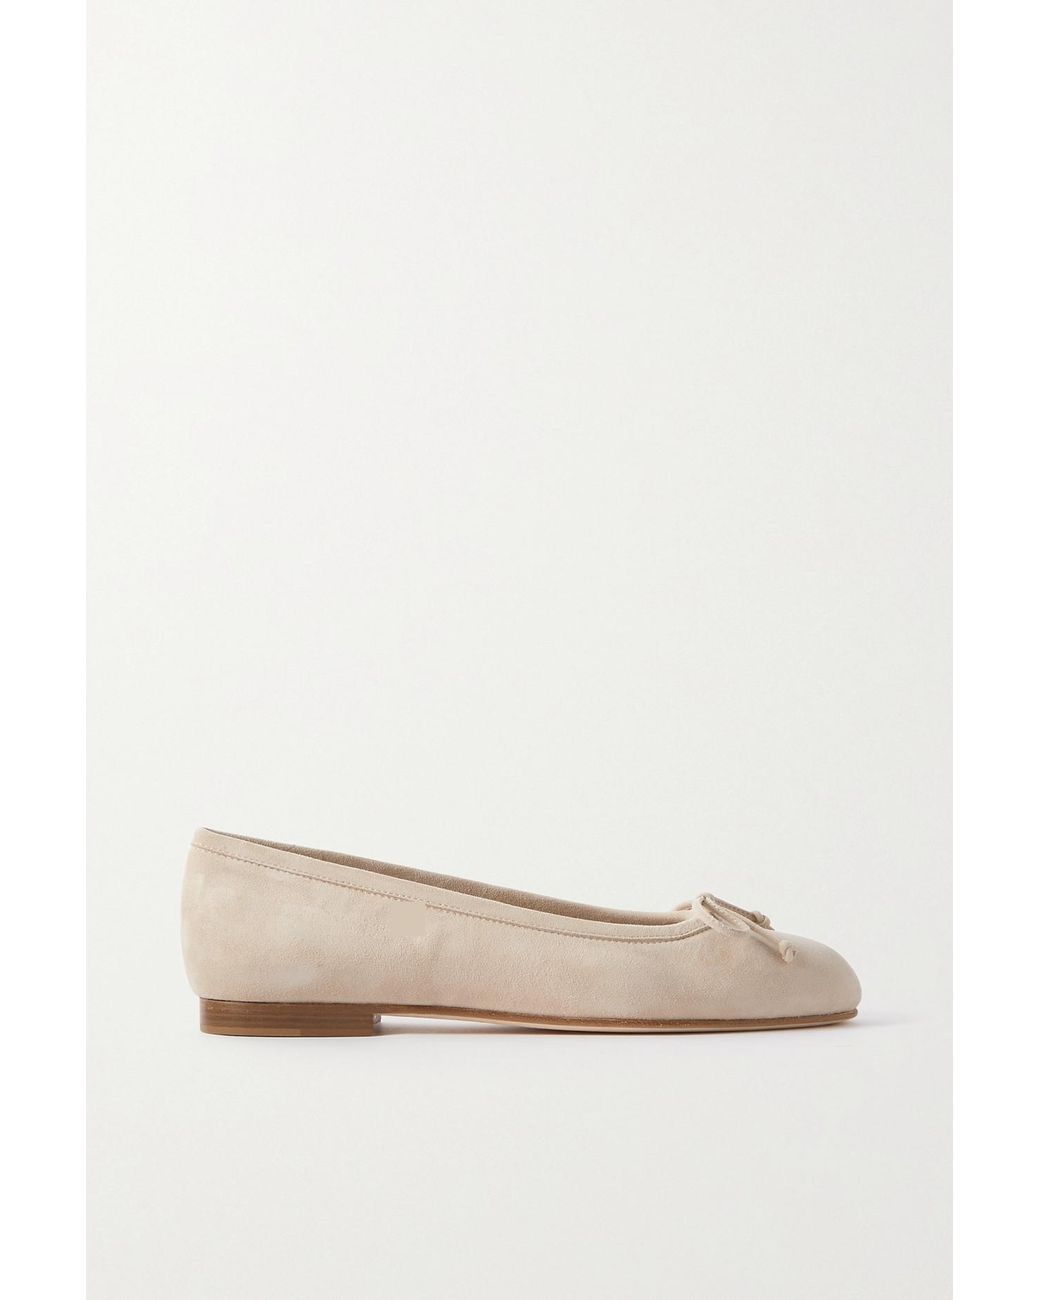 Manolo Blahnik Veralli Bow-detailed Suede Ballet Flats in Natural | Lyst